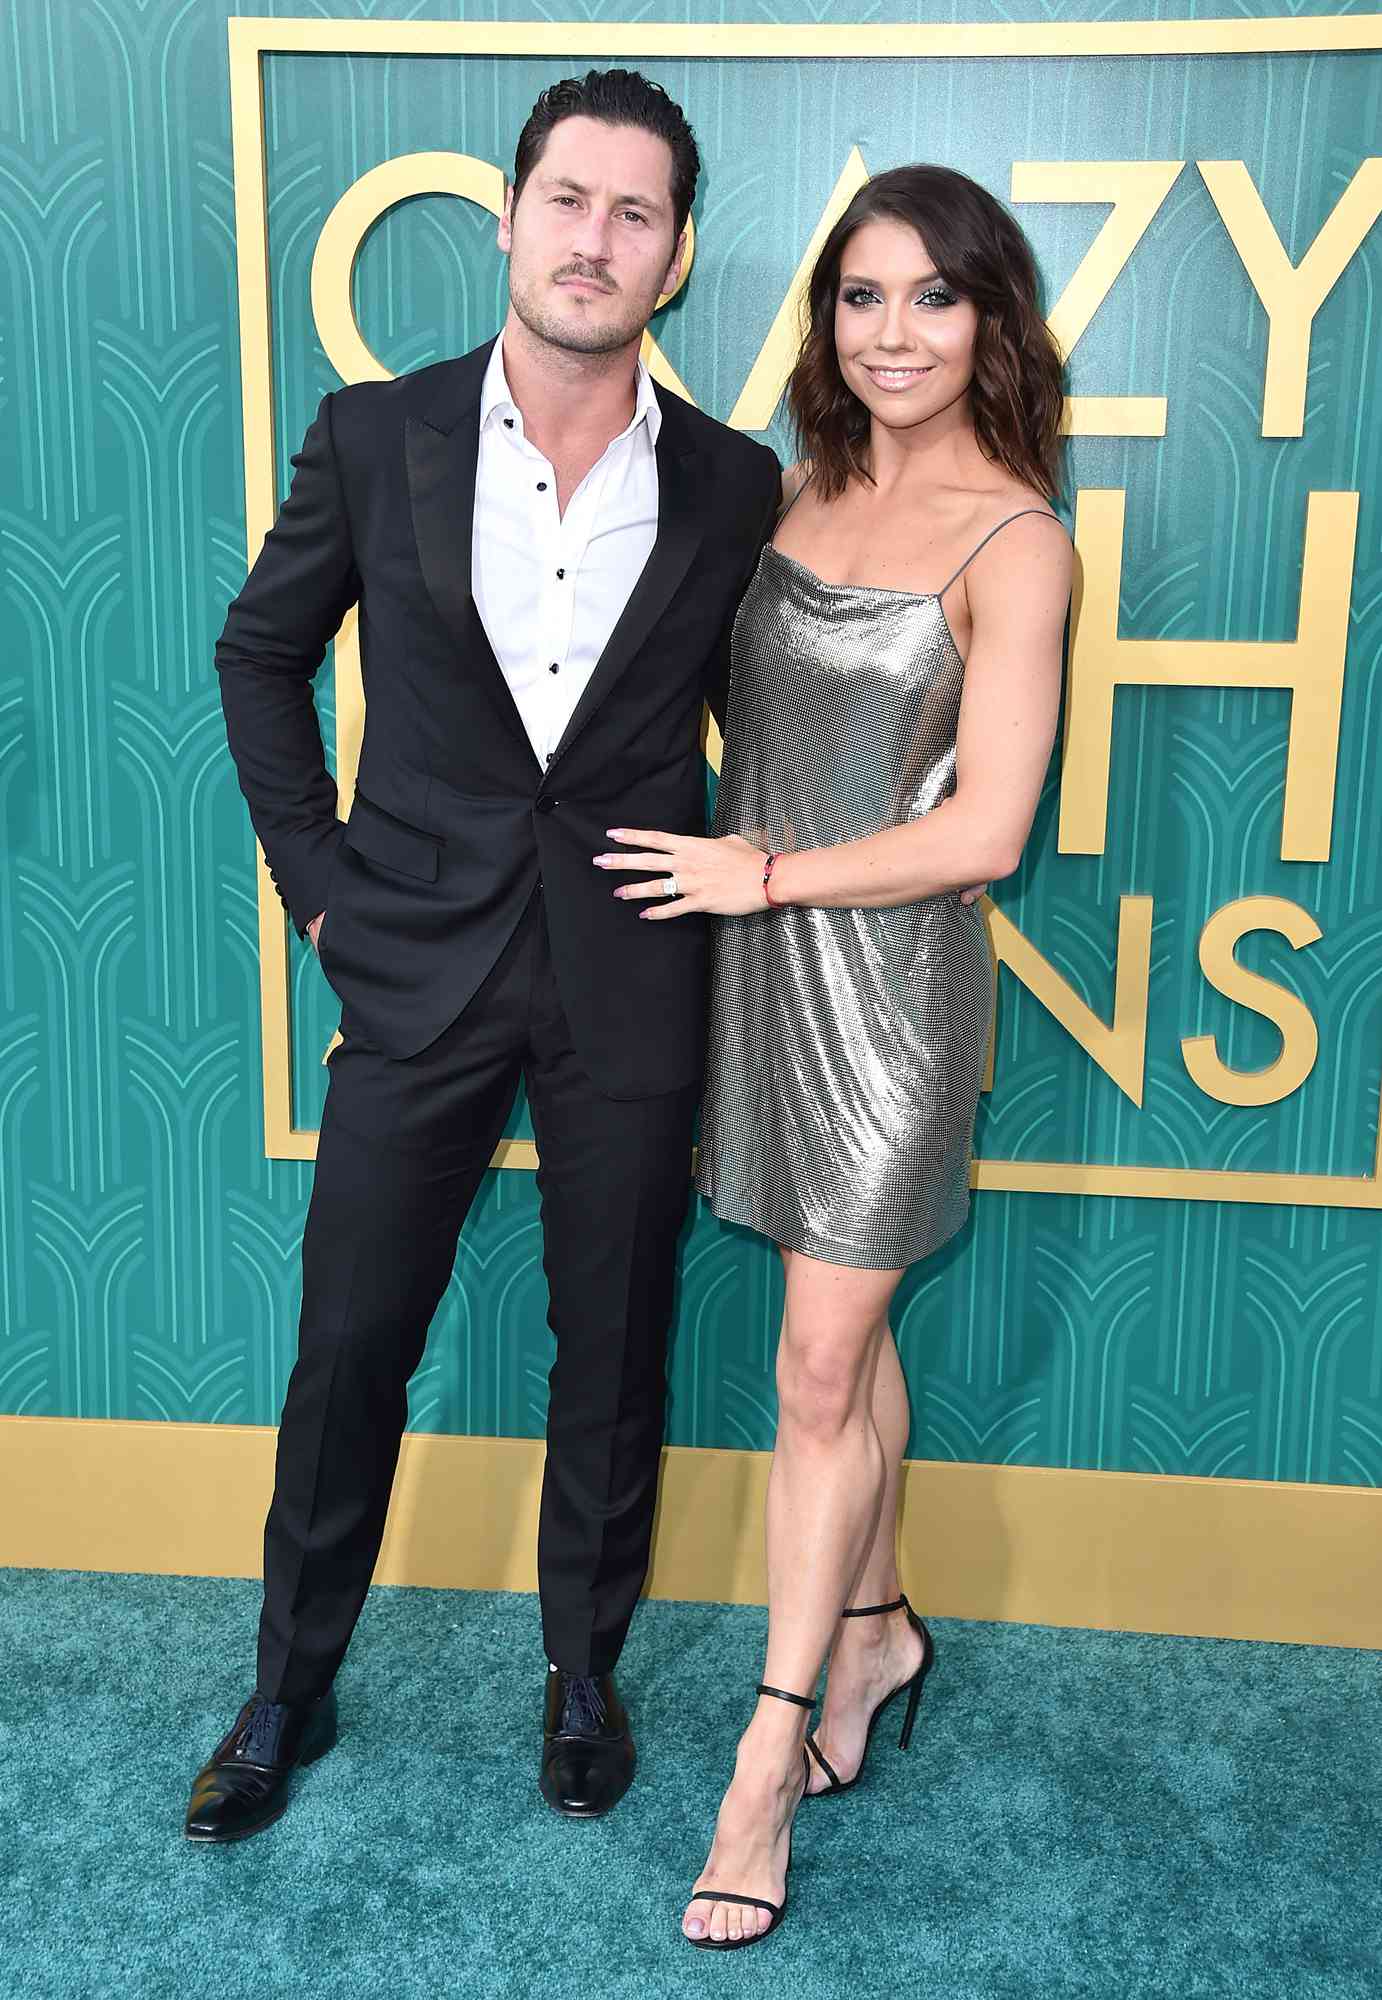 Val Chmerkovskiy and Jenna Johnson attend the premiere of Warner Bros. Pictures' "Crazy Rich Asiaans" at TCL Chinese Theatre IMAX on August 7, 2018 in Hollywood, California.